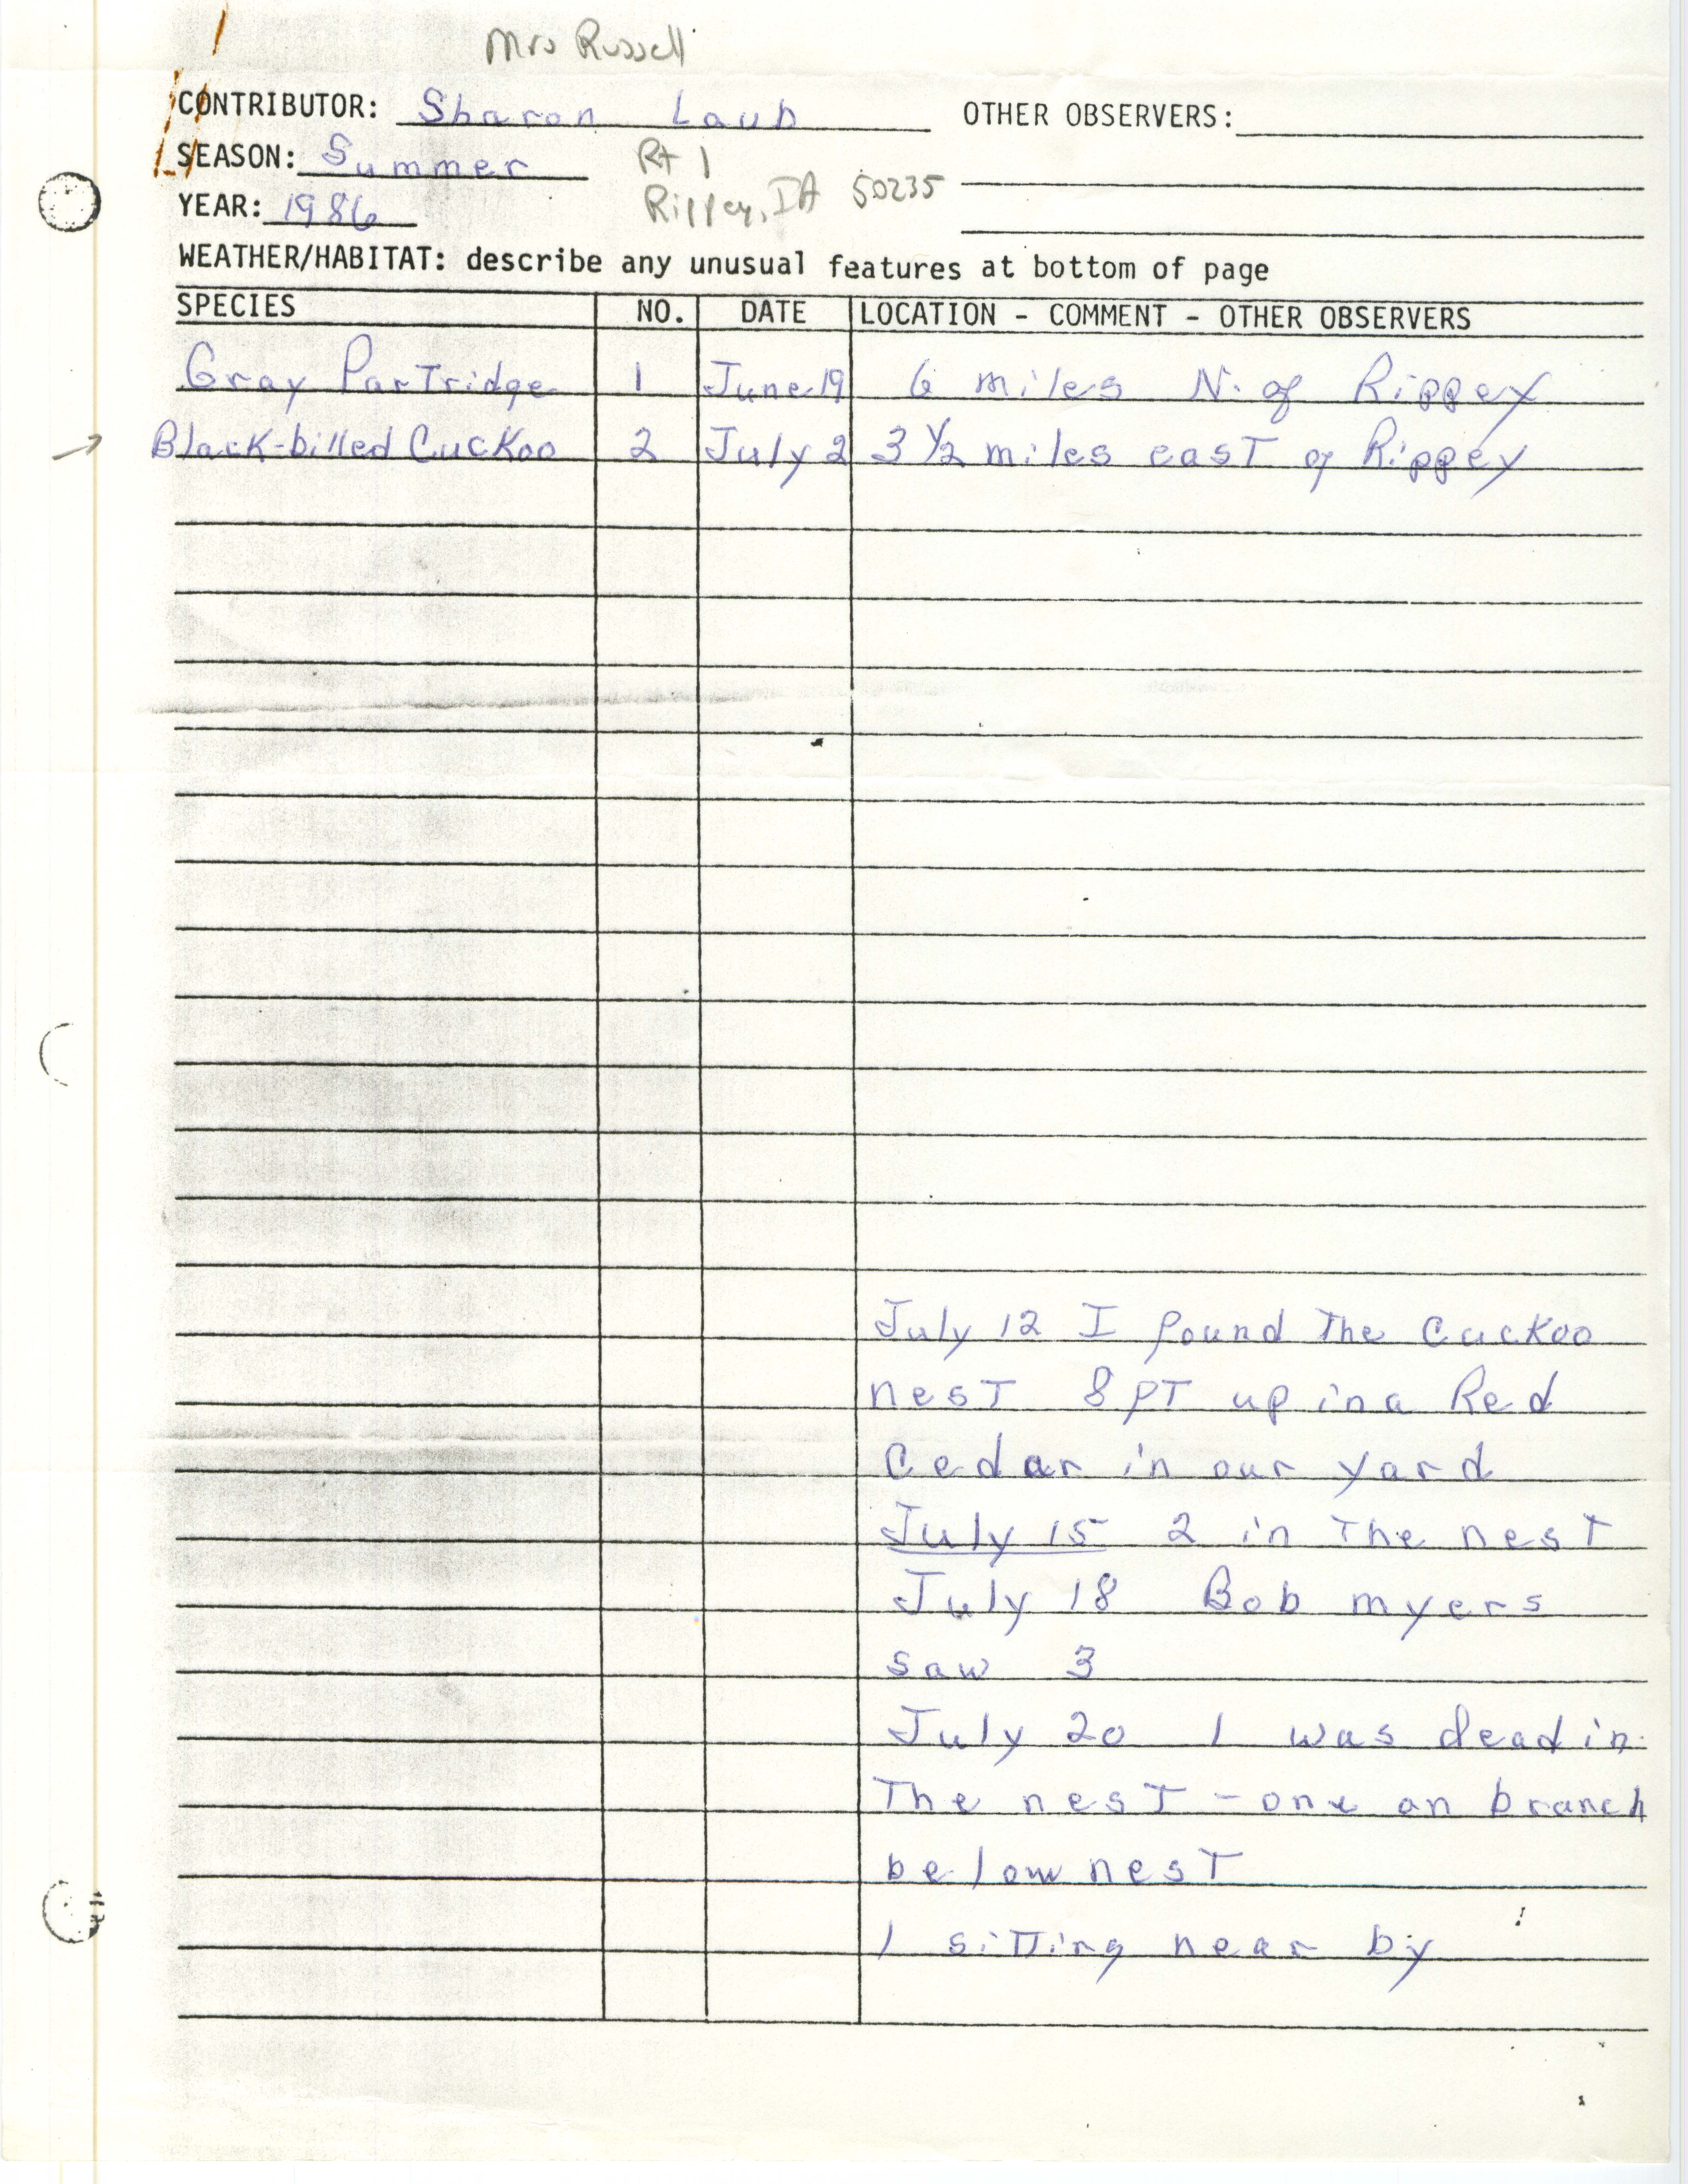 Field notes contributed by Sharon Laub, summer 1986